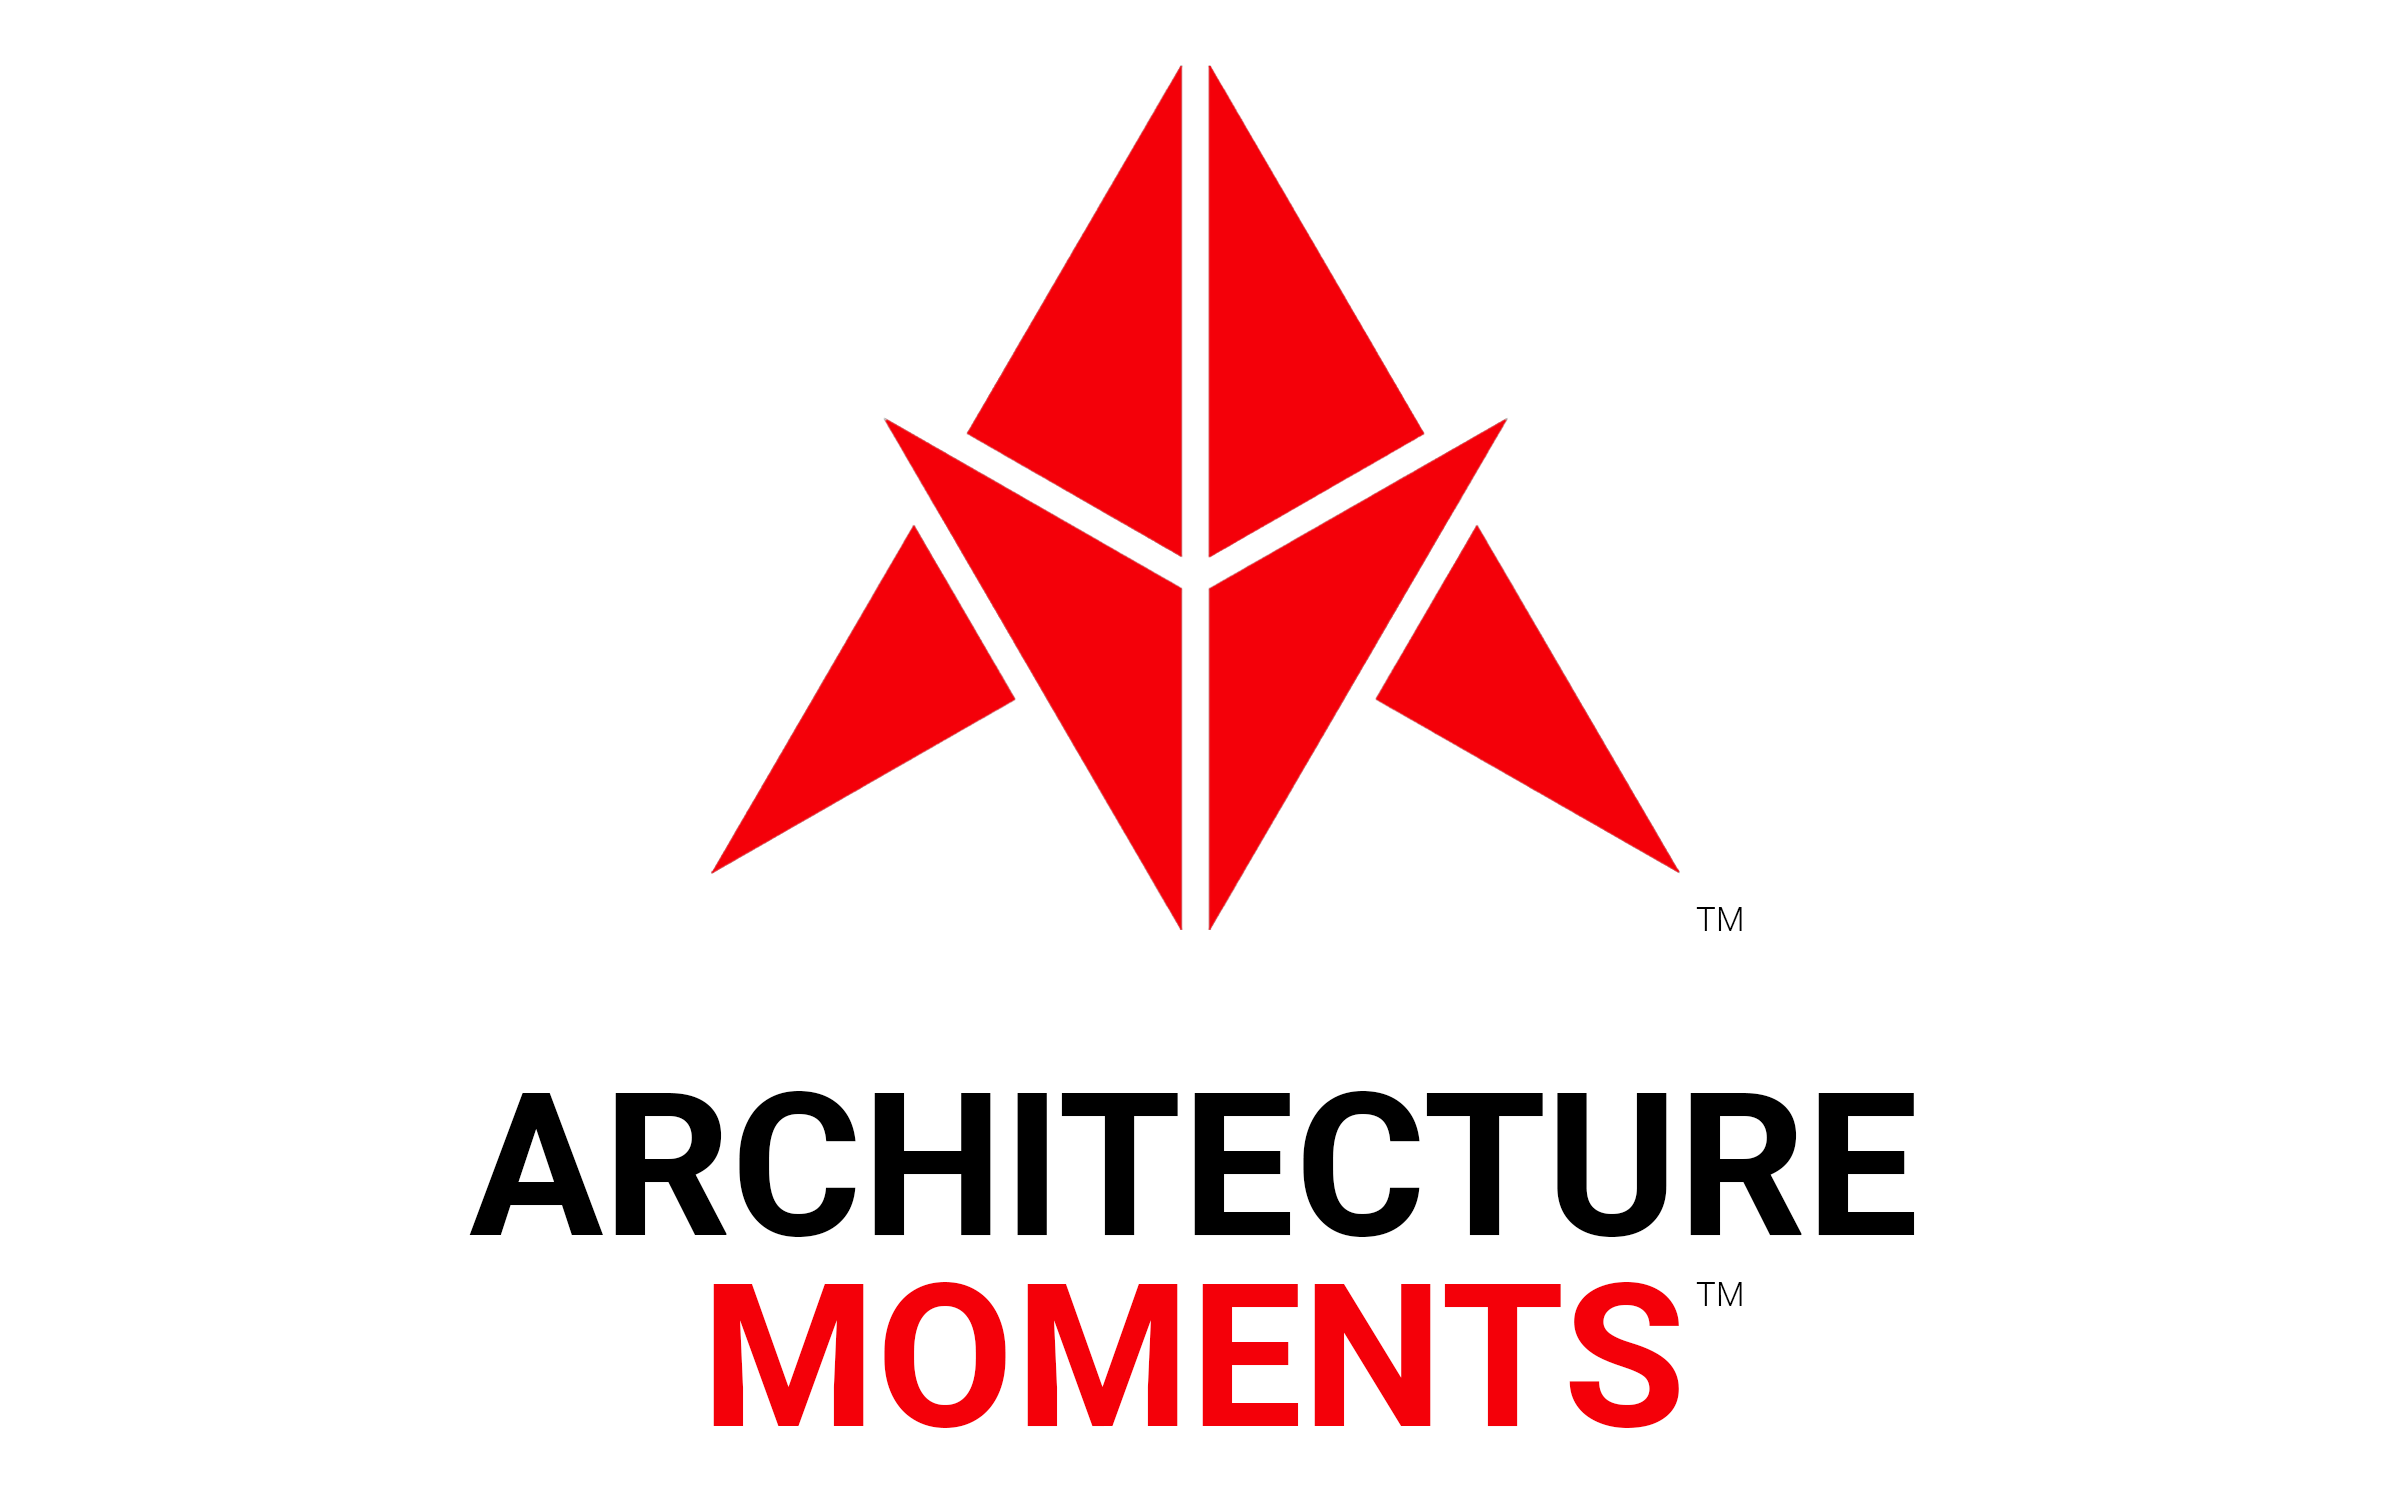 ARCHITECTURE MOMENTS - HIVE BLOG POST FOOTER LOGO.png